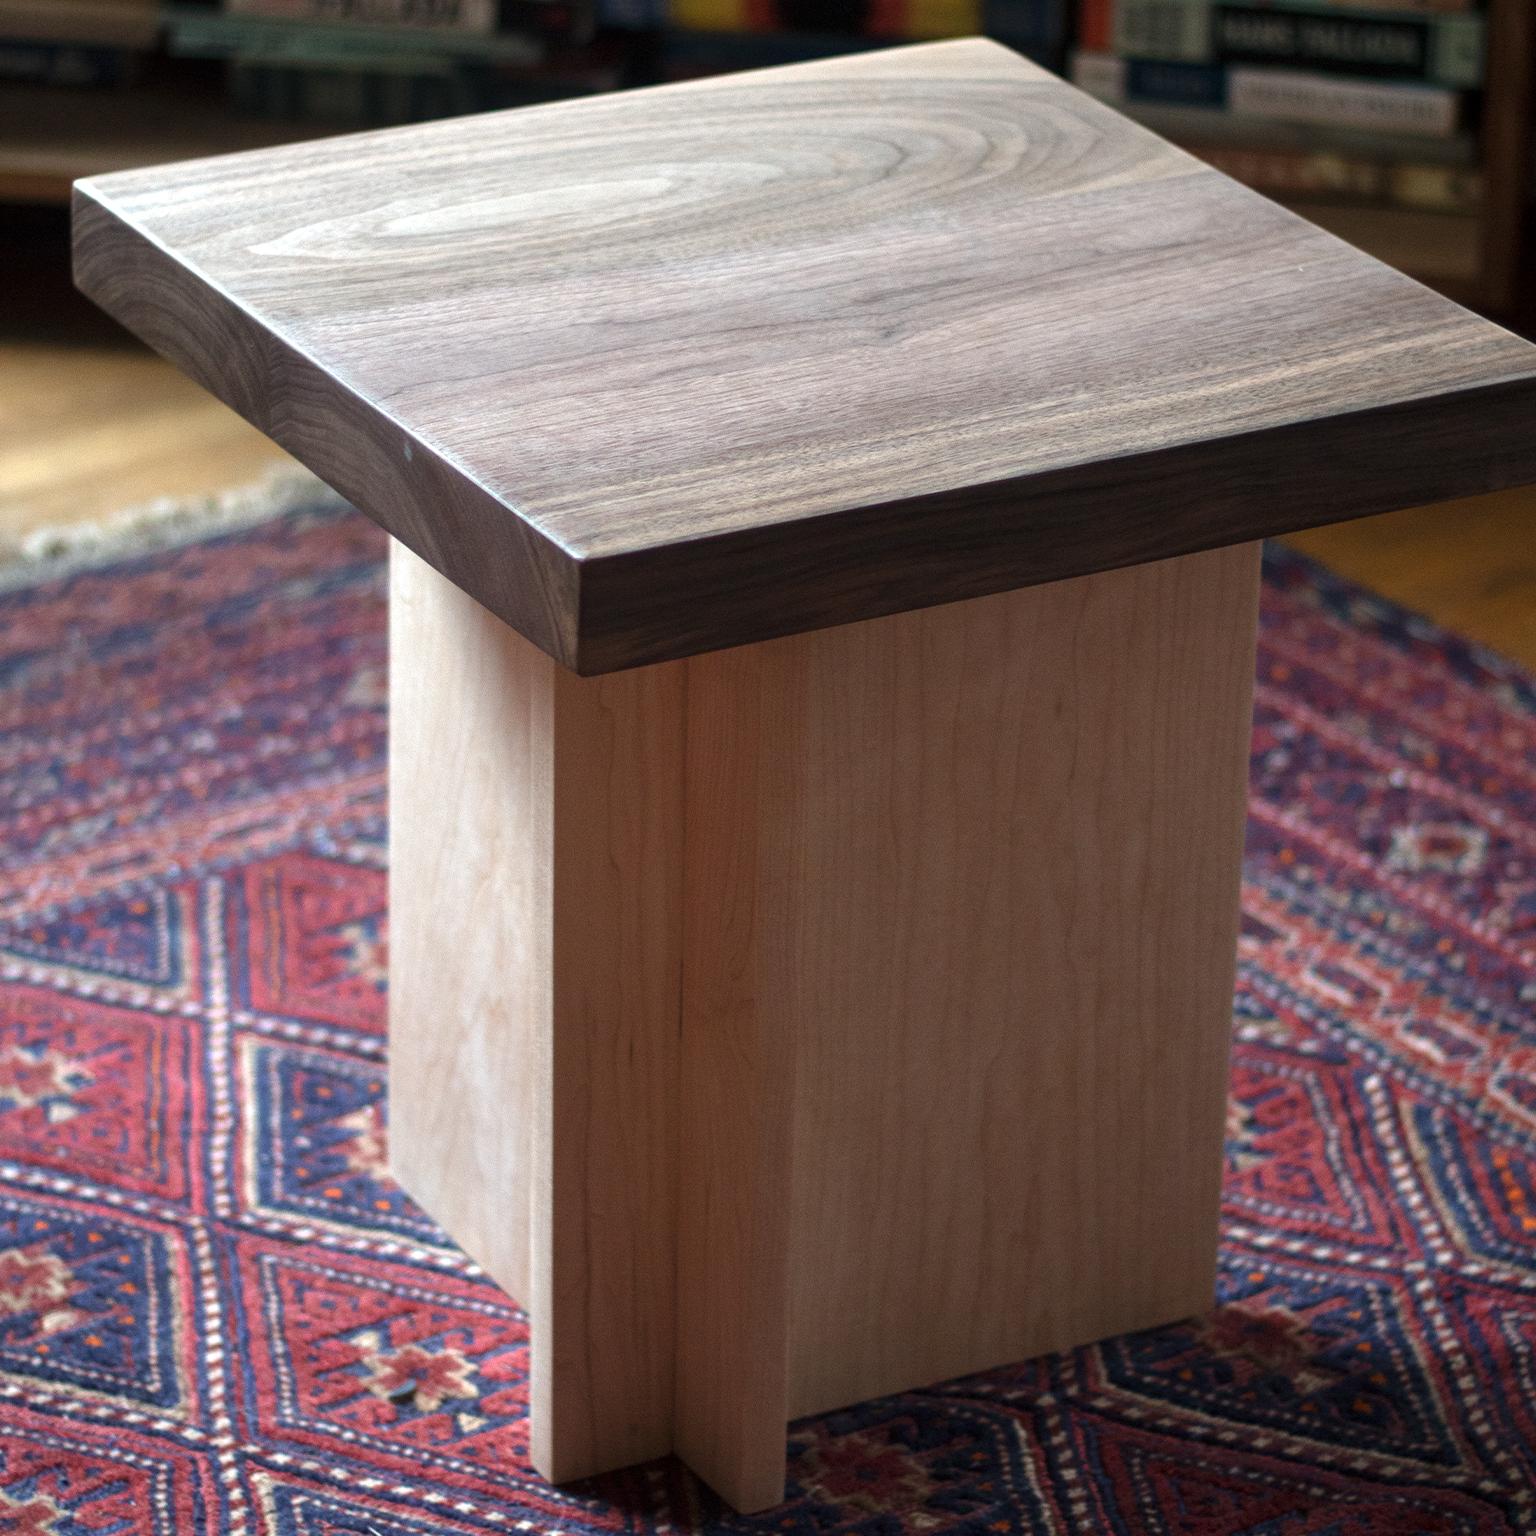 This is a solid walnut and maple side table or small stool. The profile is asymmetrical and architectural while celebrating the natural wood elements. 

Customizable.